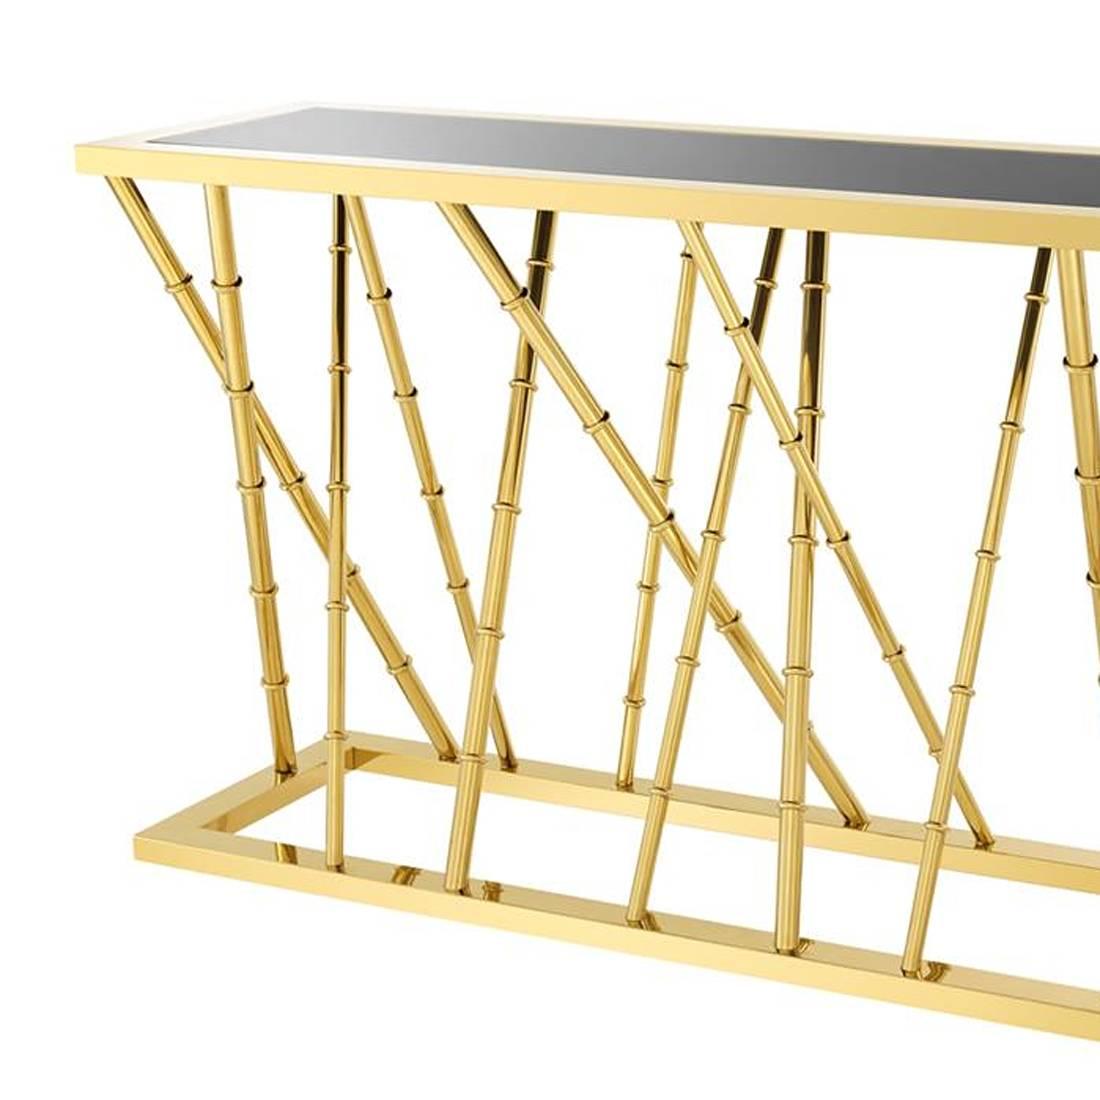 Console table gold bamboo with polished stainless
steel structure in gold finish. With black glass top.
 